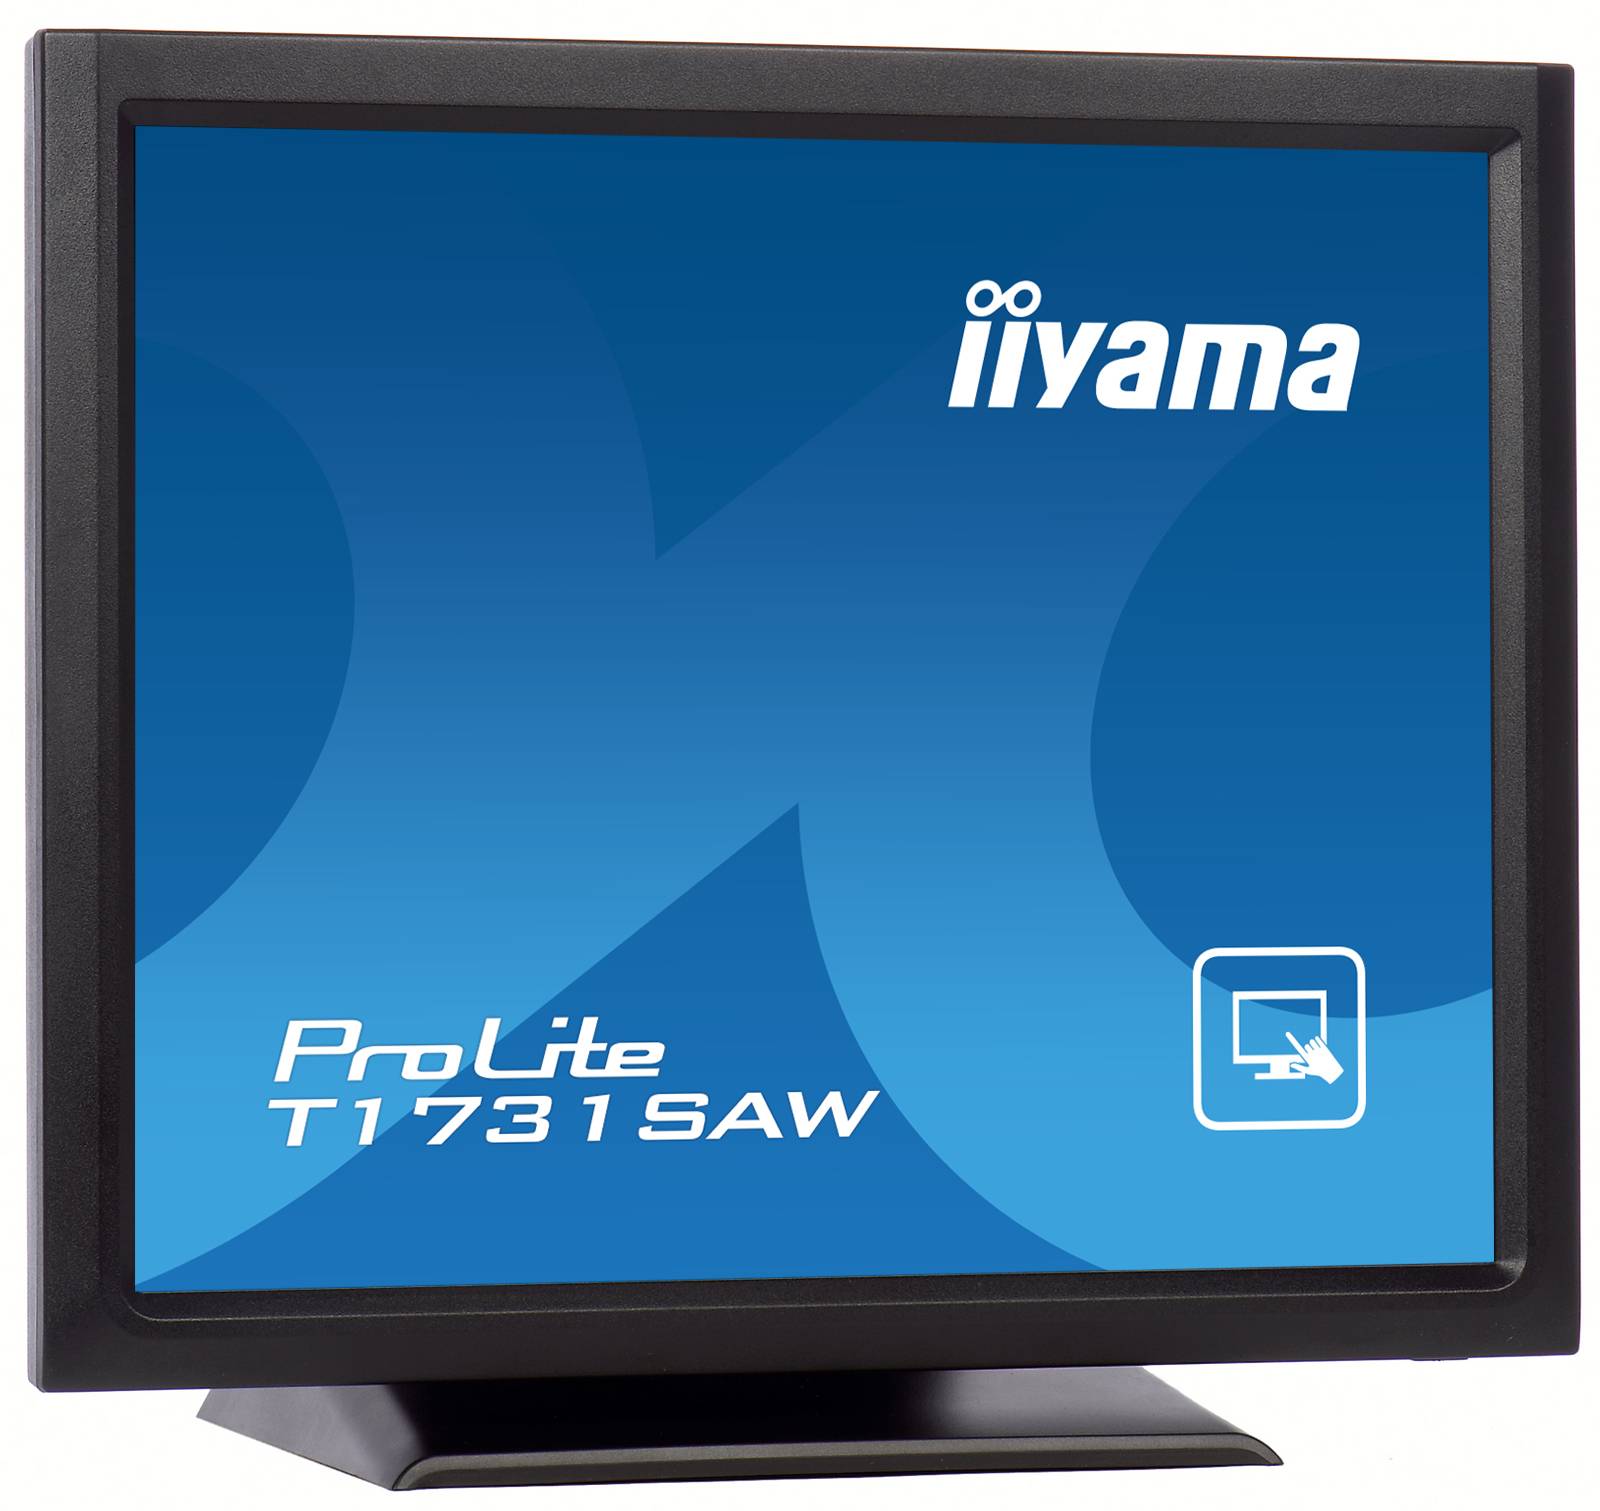 Rca Informatique - image du produit : 17IN LCD 1280X1024 16:9 1000:1 5MS RS232 AND USB